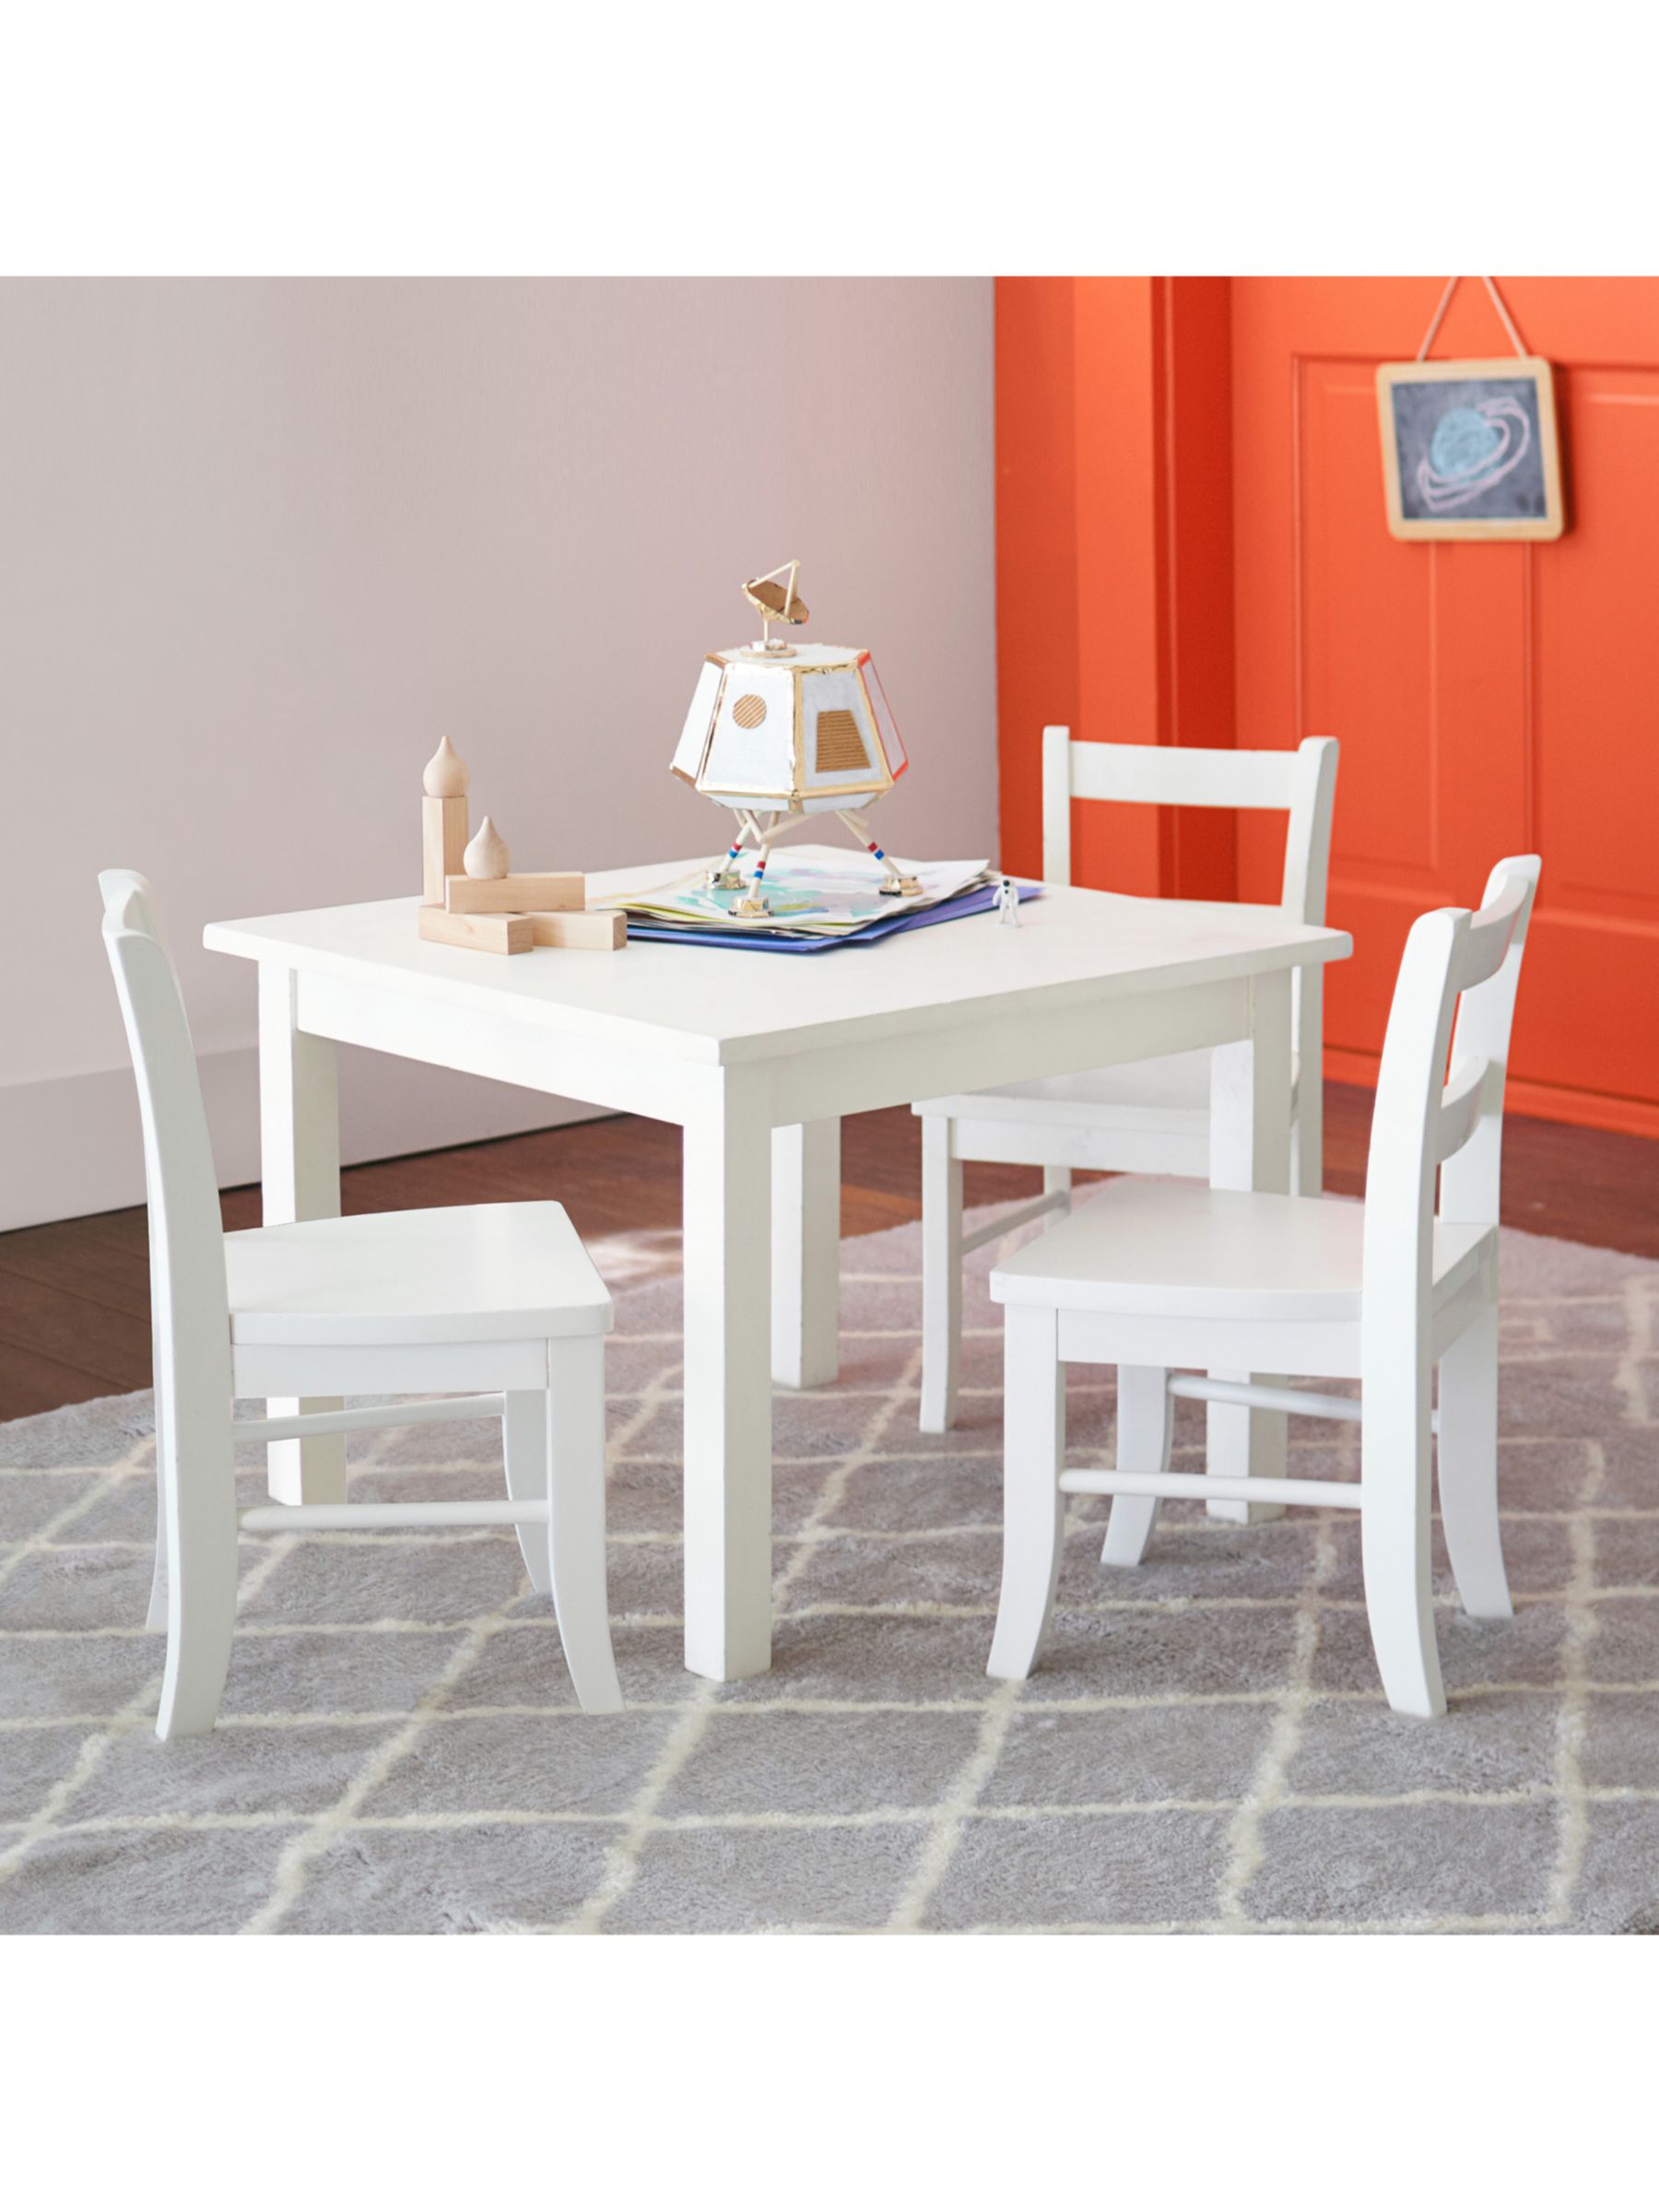 pottery barn kids table and chair set